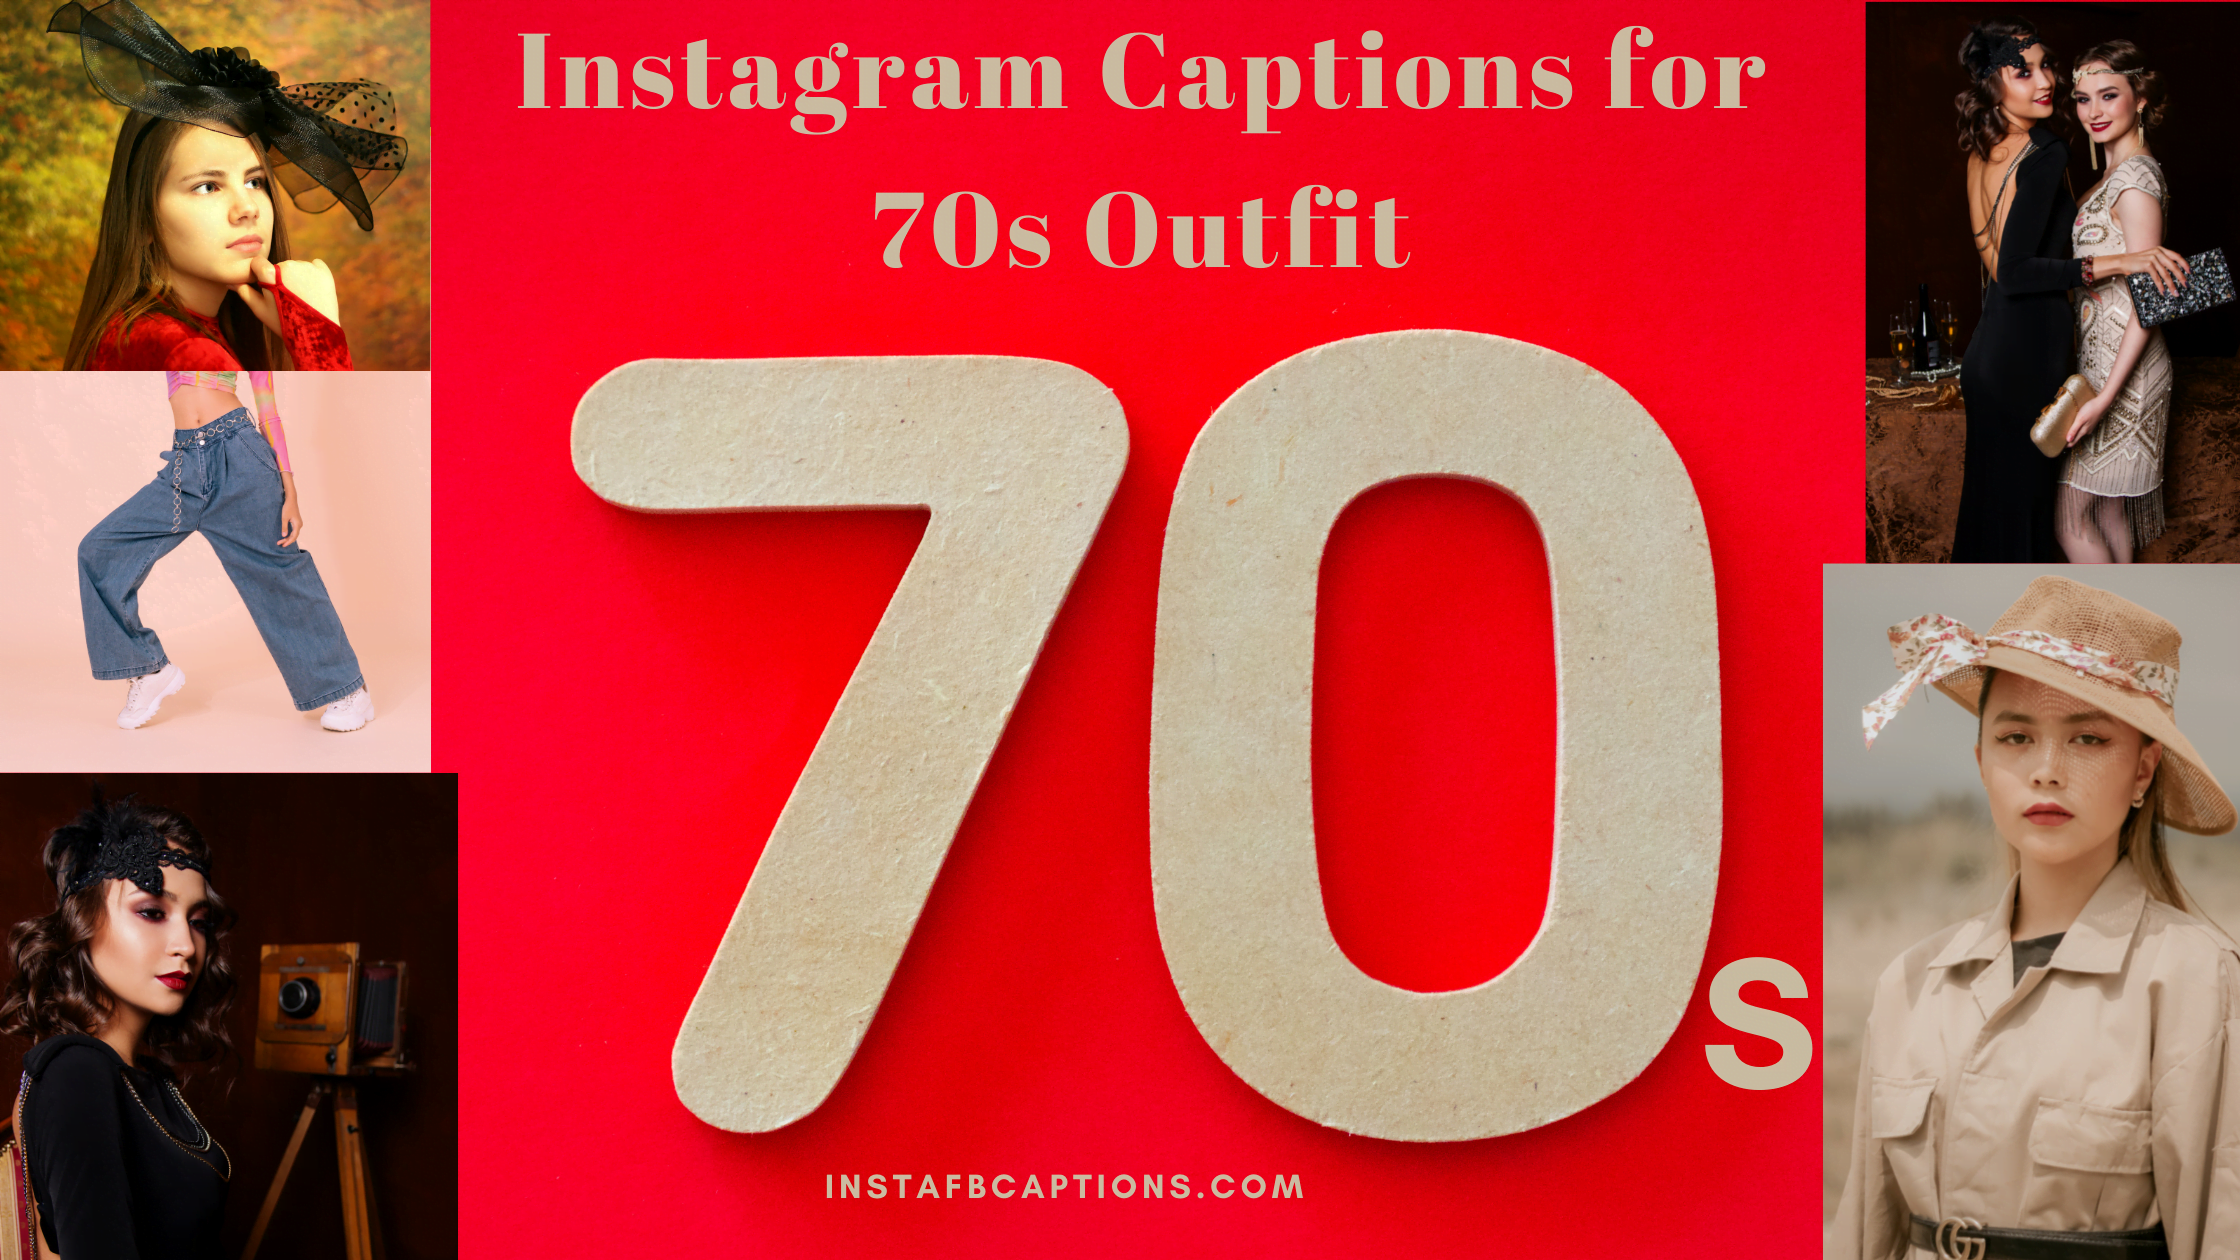 Instagram Captions For 70s Outfit  - Instagram Captions for 70s Outfit - [New] Instagram Captions for 70s Outfit in 2023